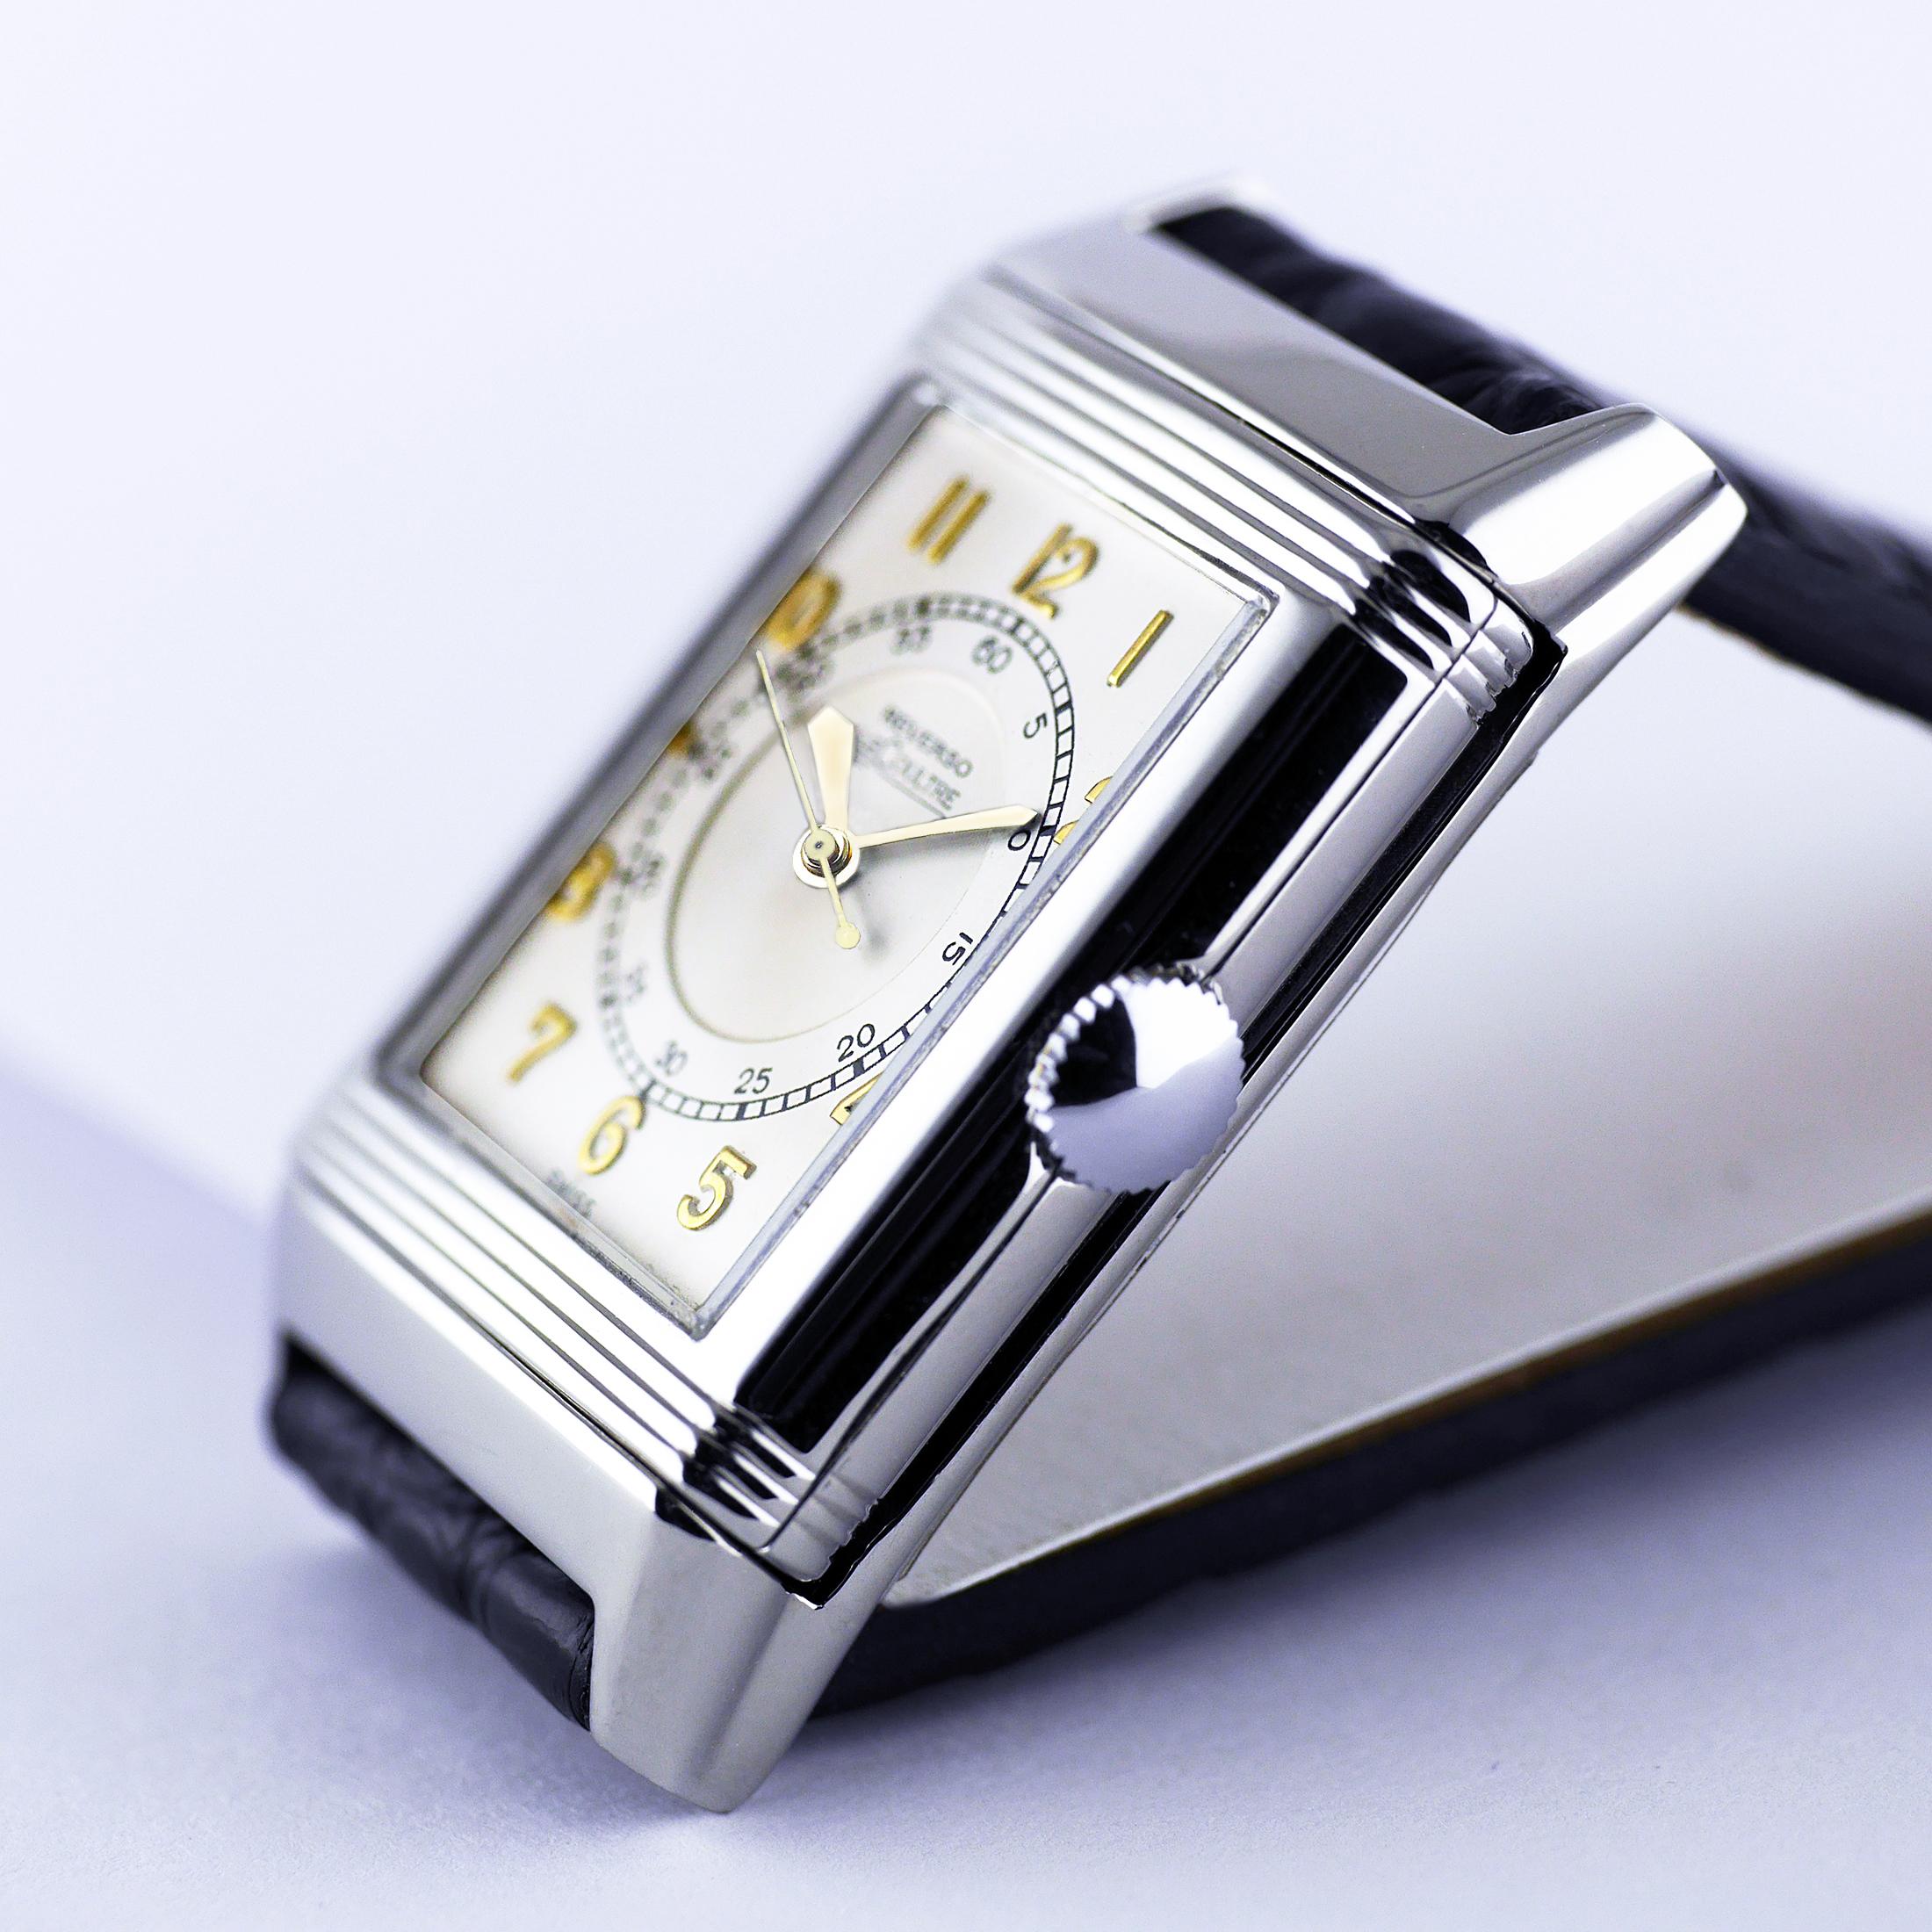 Le Coultre Reverso, Art Deco, Stainless Steel Wristwatch, circa 1934 In Excellent Condition For Sale In London, GB